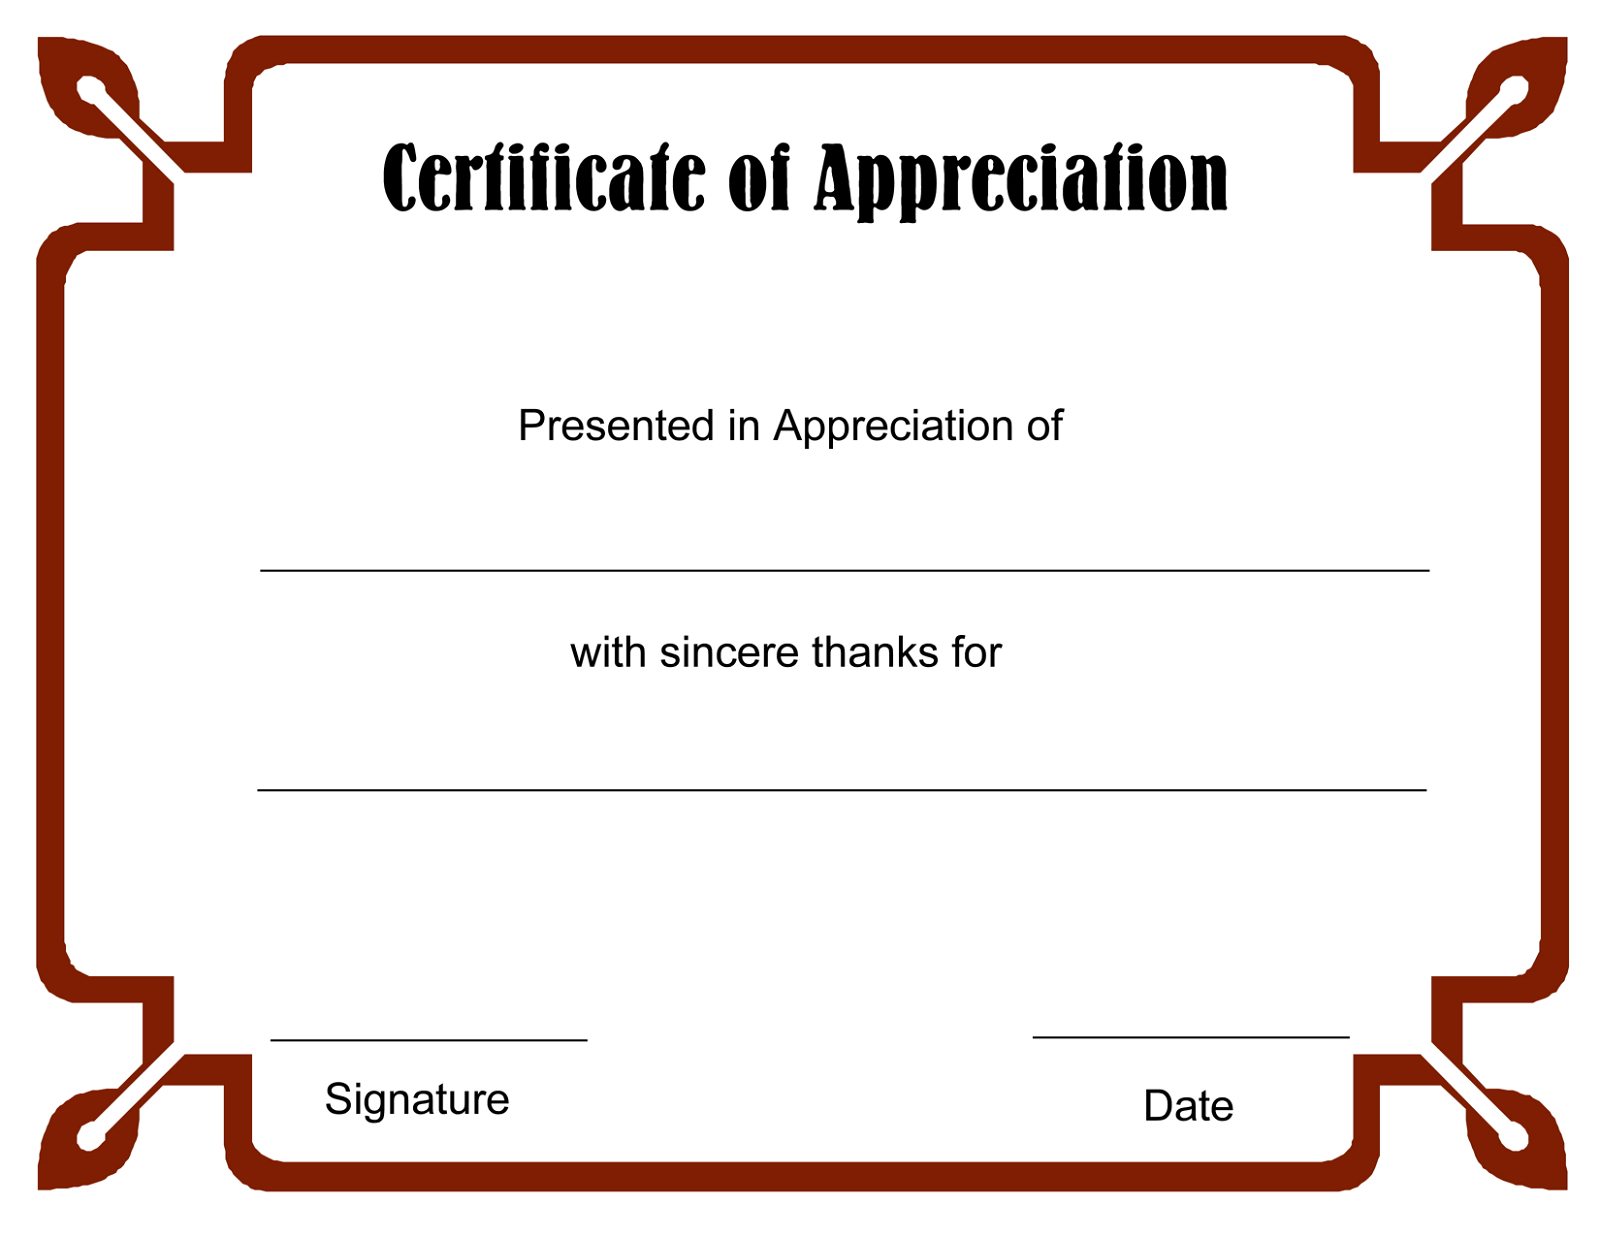 Blank Certificate Templates To Print | Blank Certificate Templates - Free Printable Soccer Certificate Templates